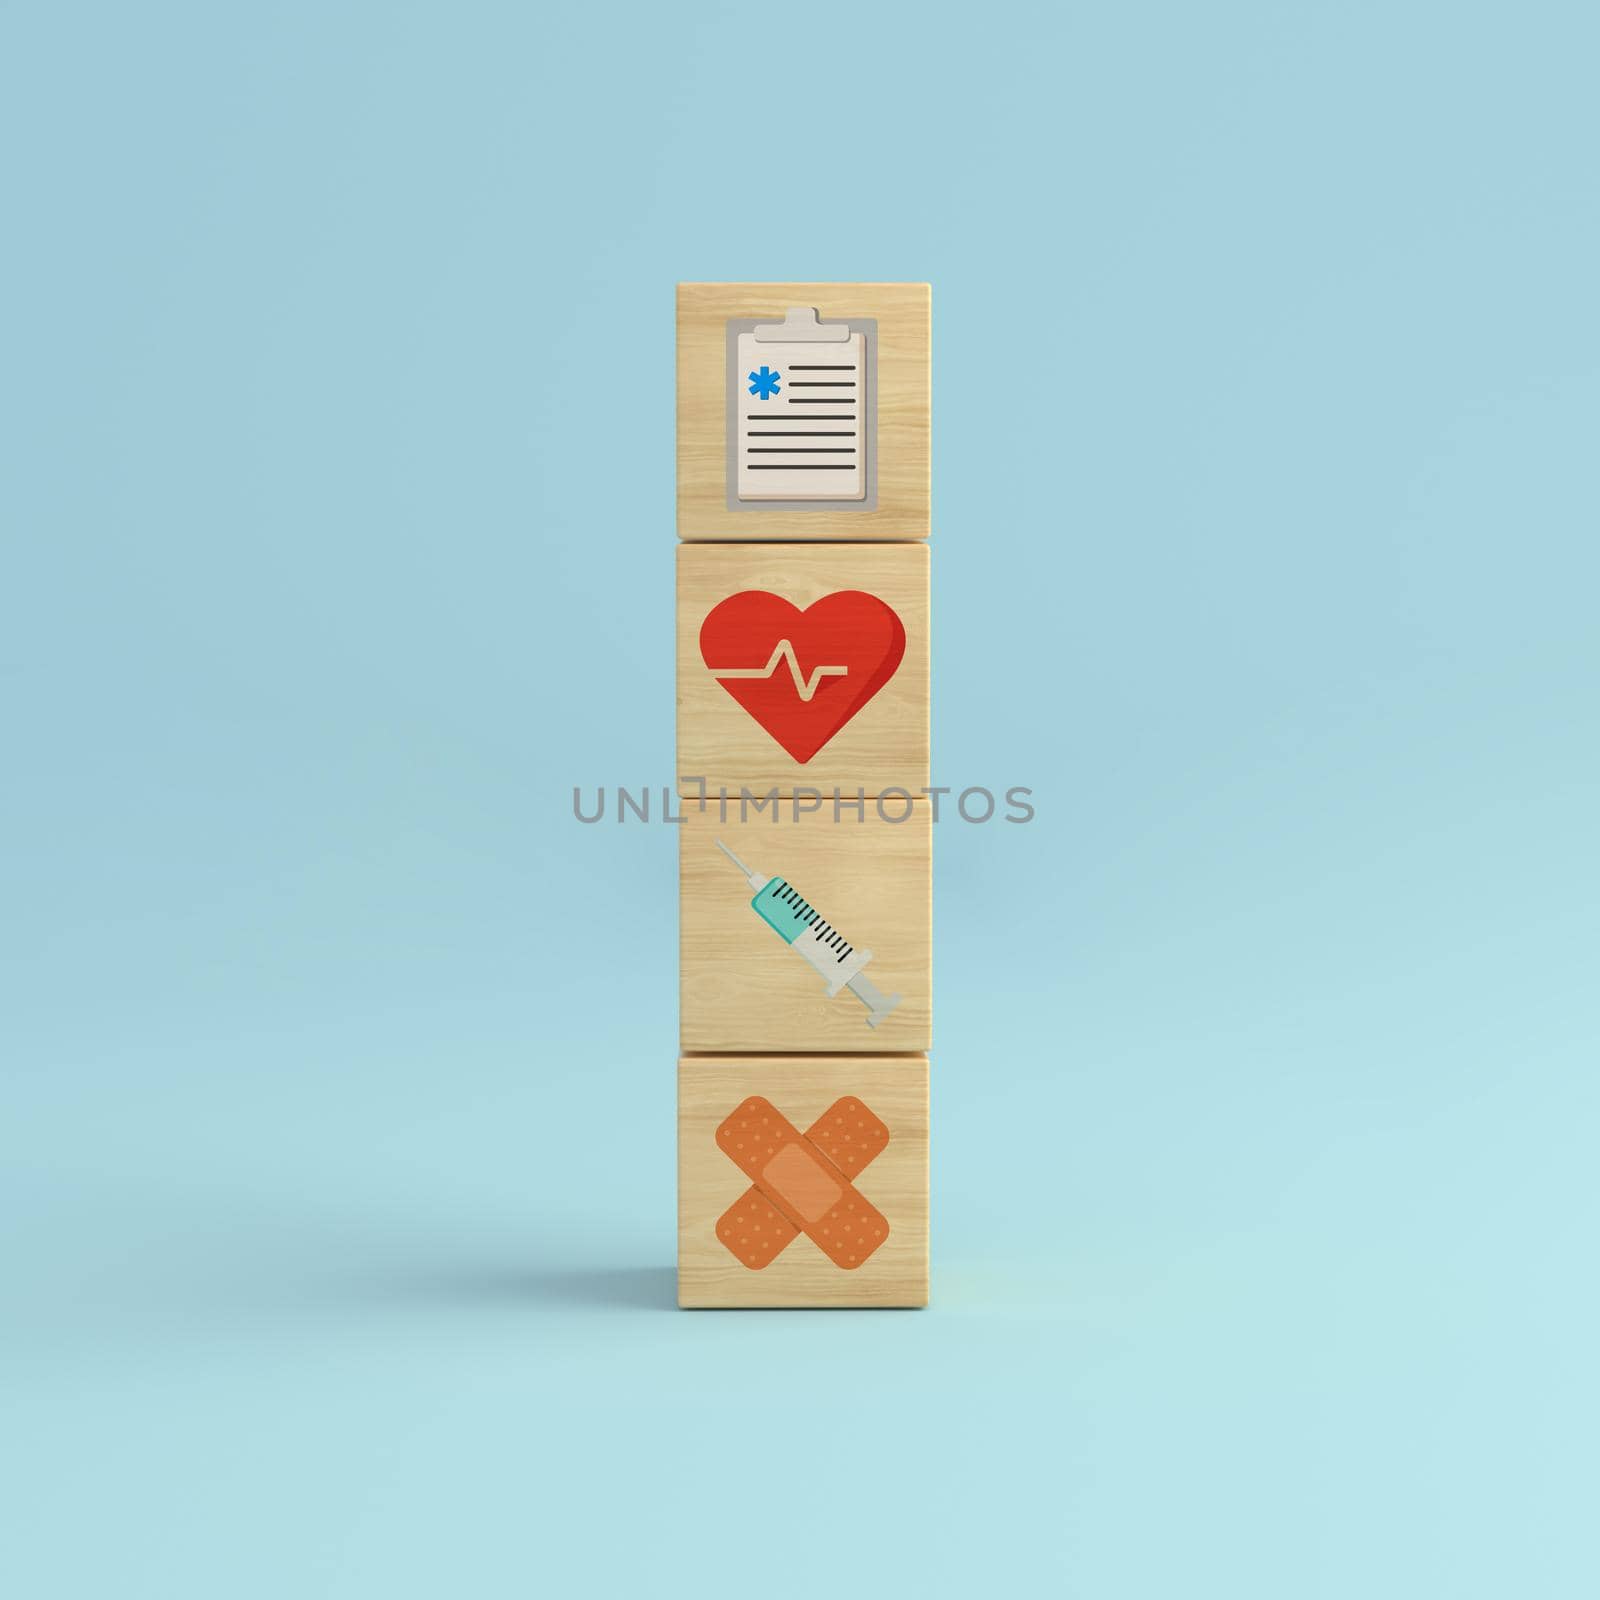 Healthcare icon syringe, health and band on blue background. Wooden cube block tower . Vaccine concept. 3D rendering.